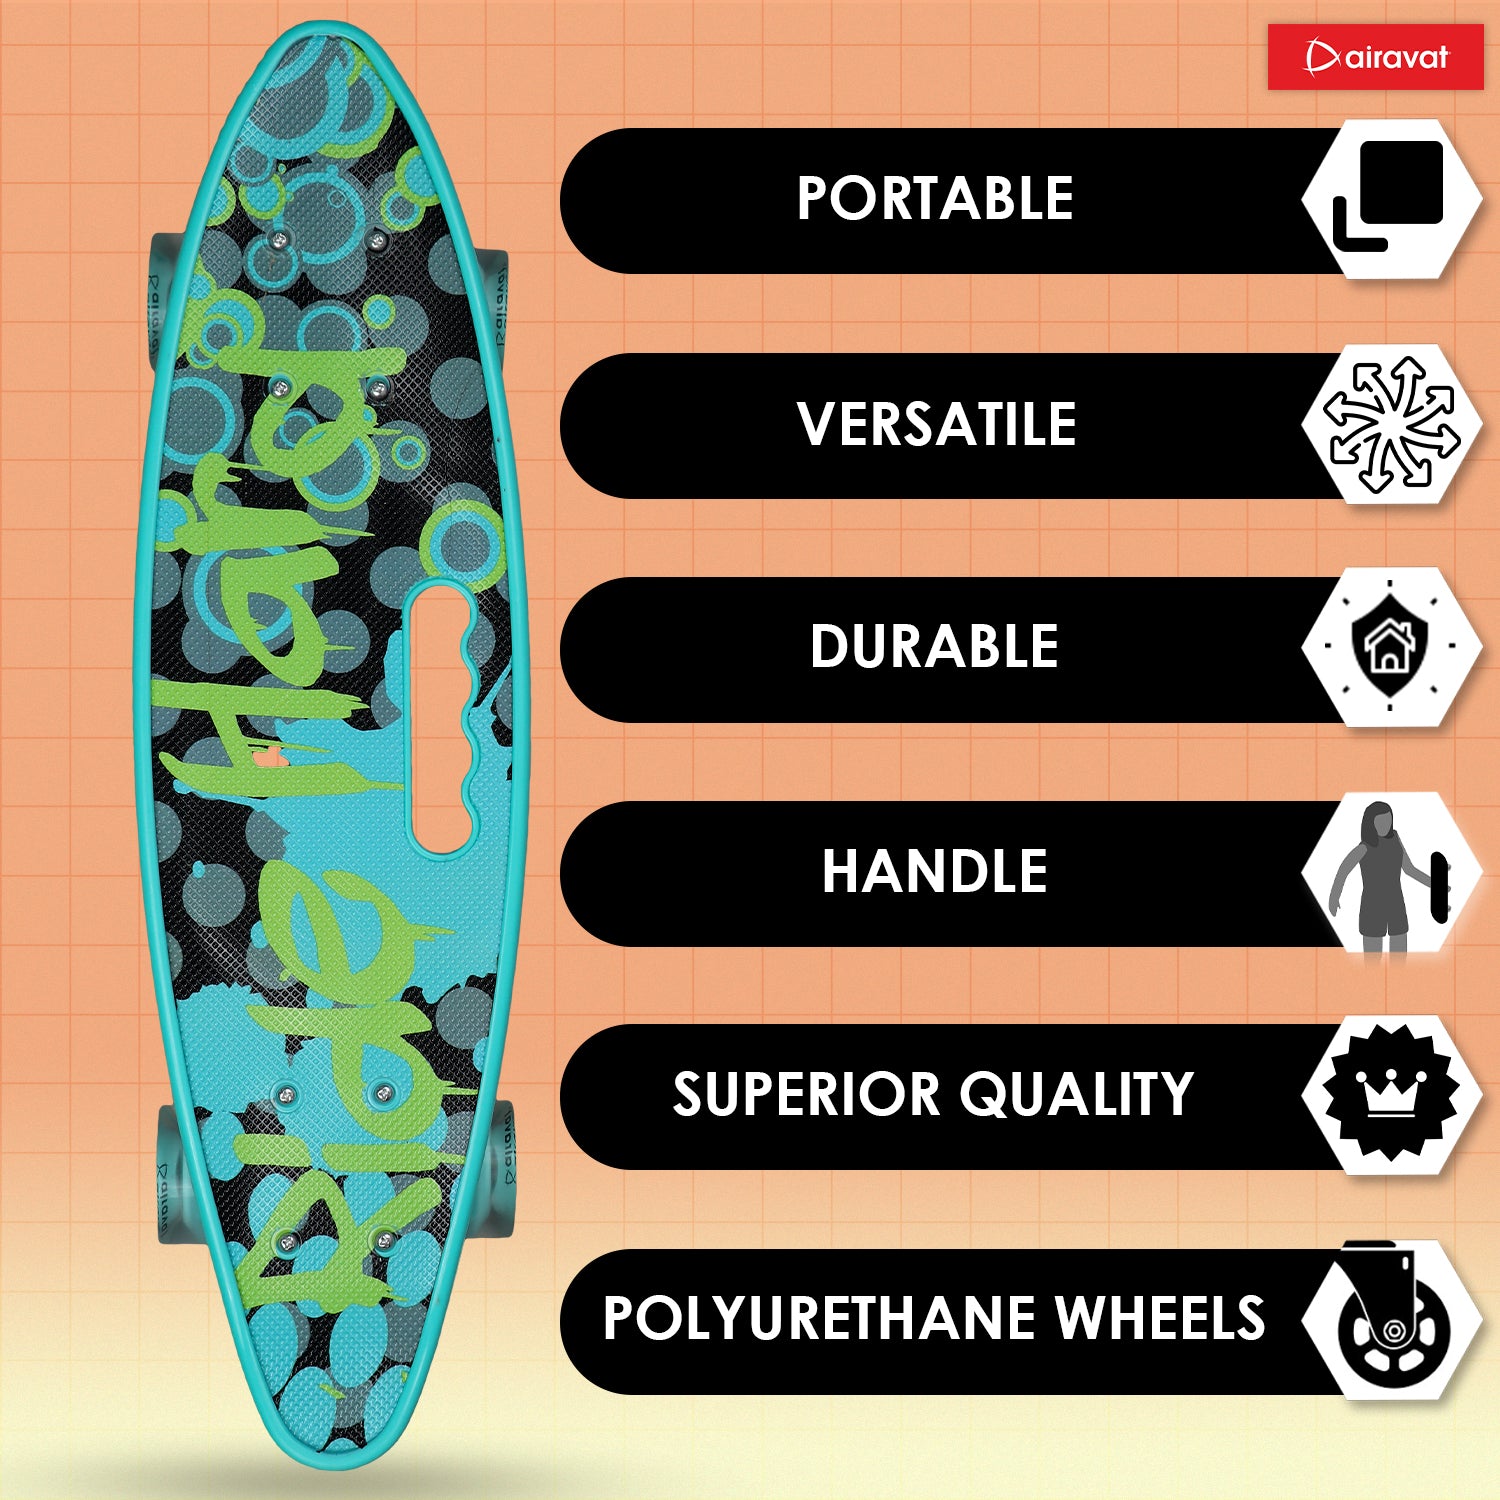 7813-skateboard-style1-more-Features